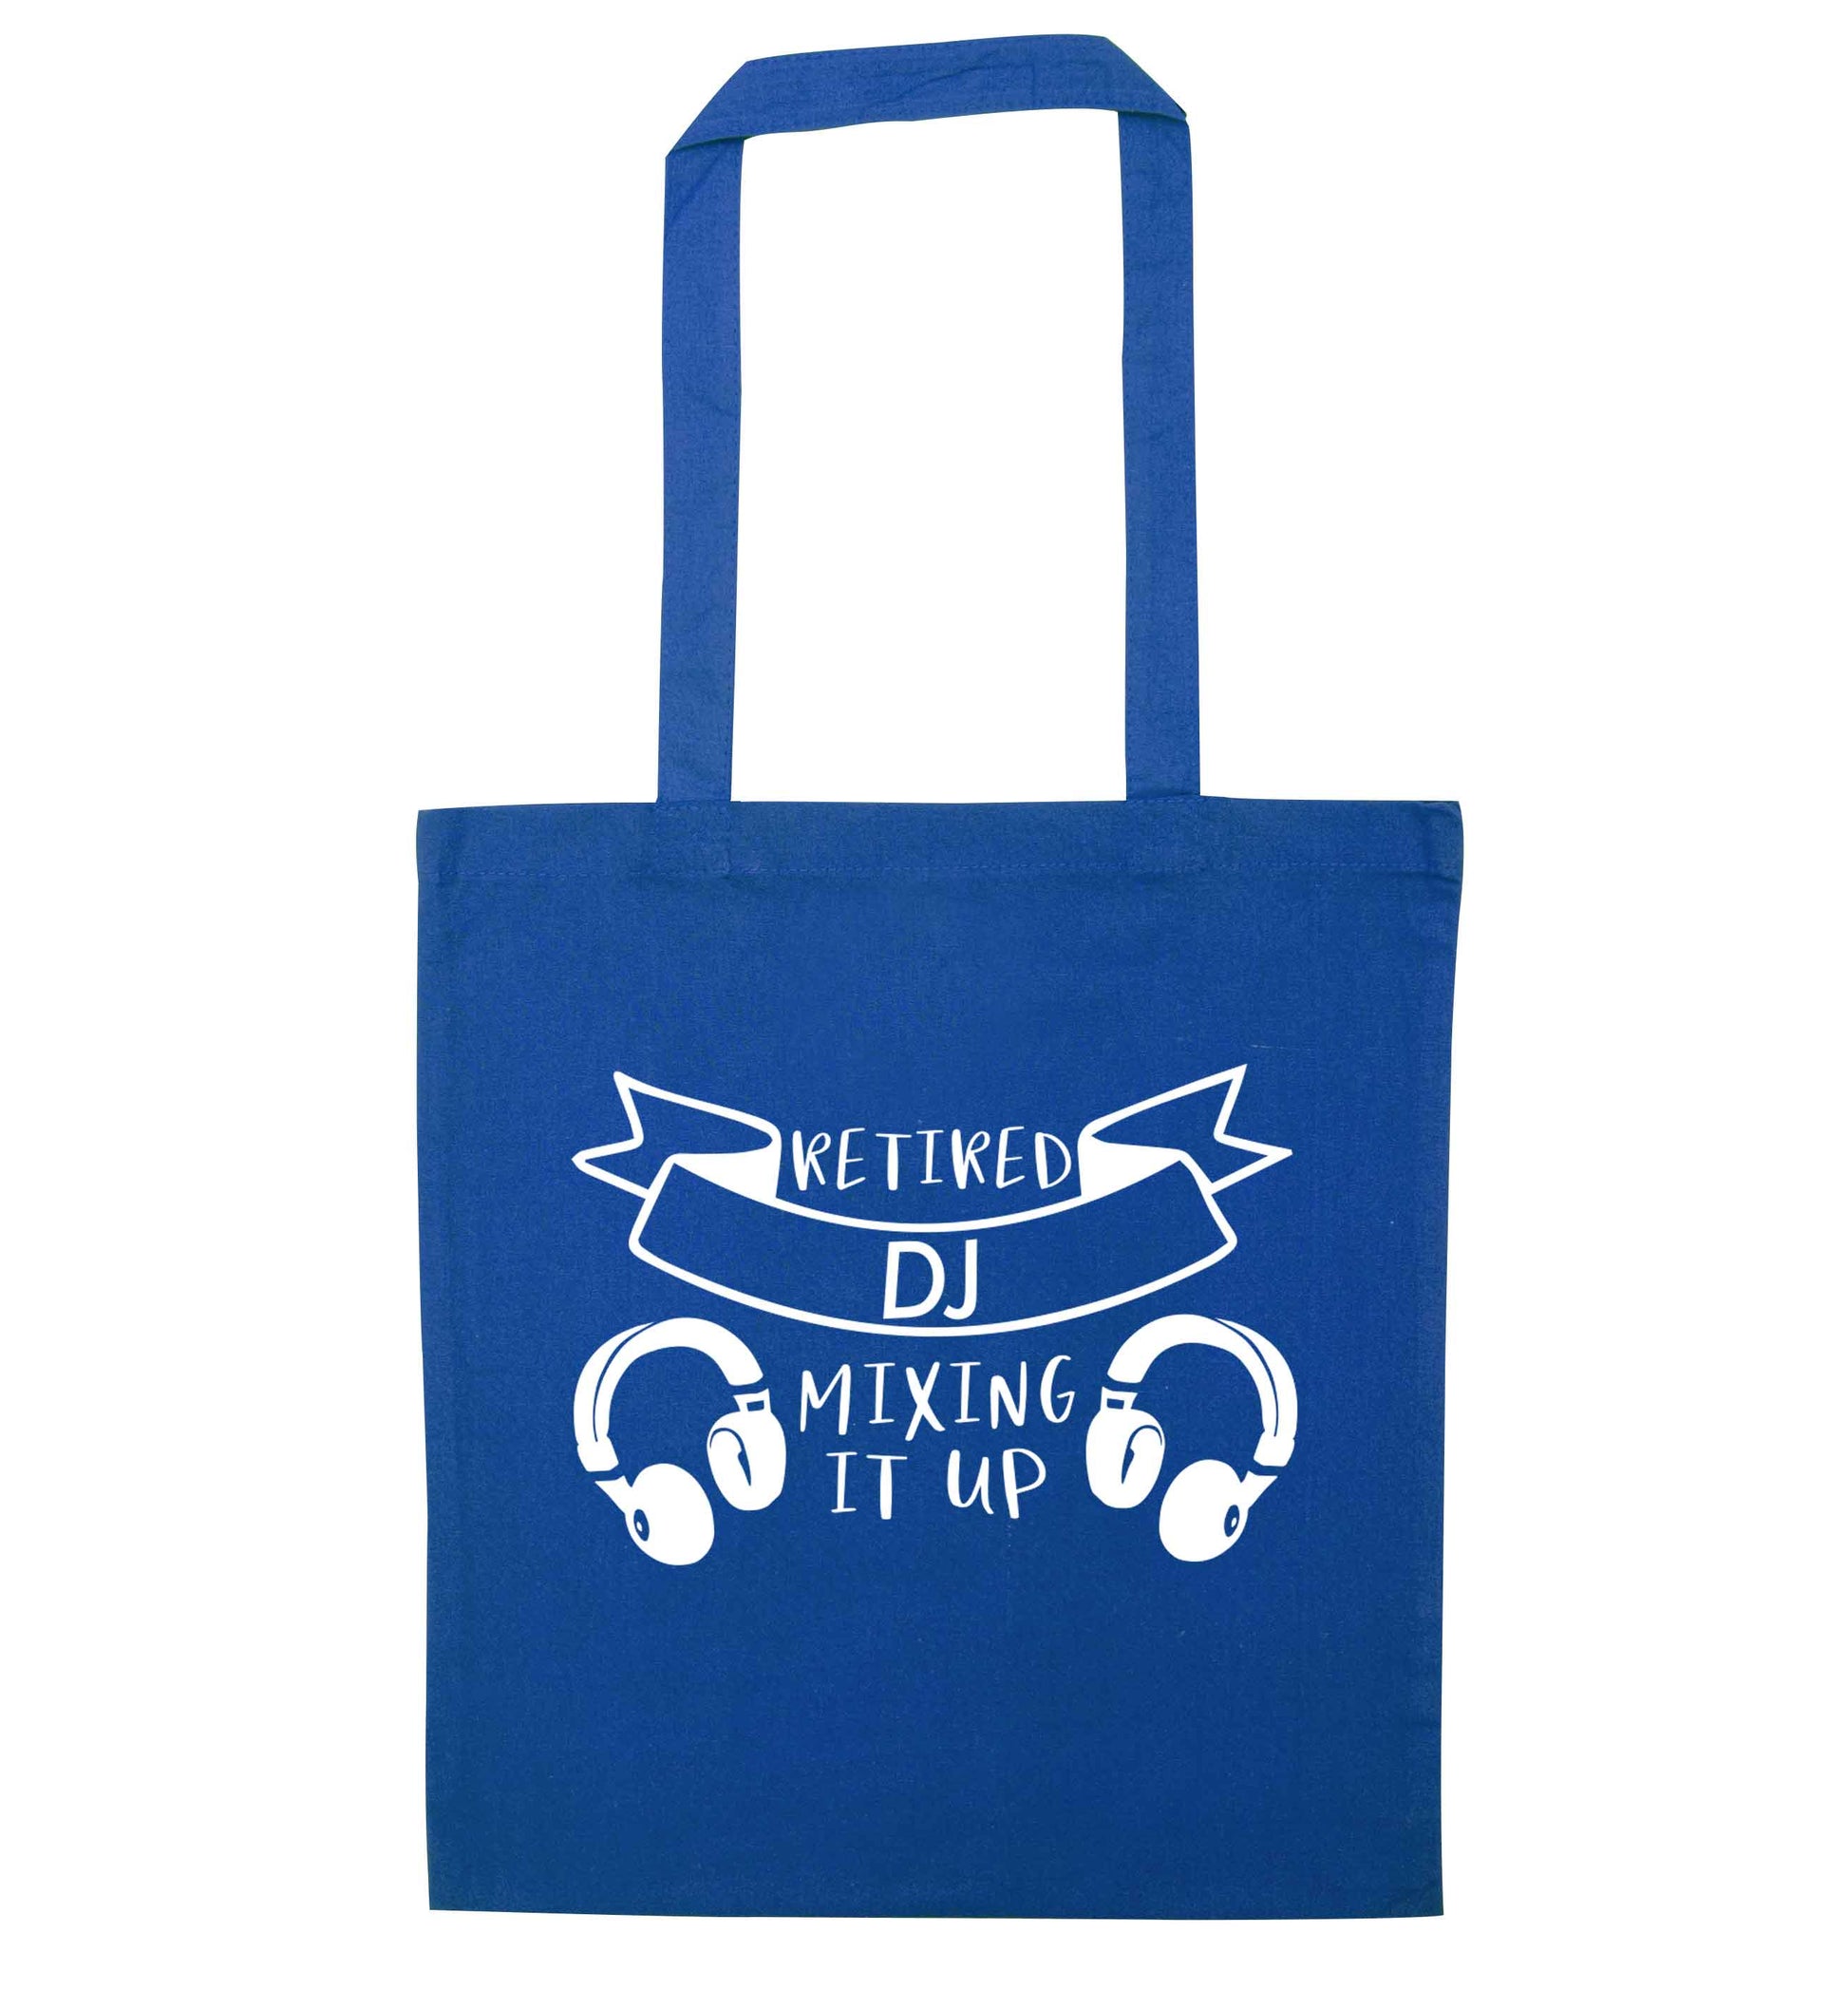 Retired DJ mixing it up blue tote bag